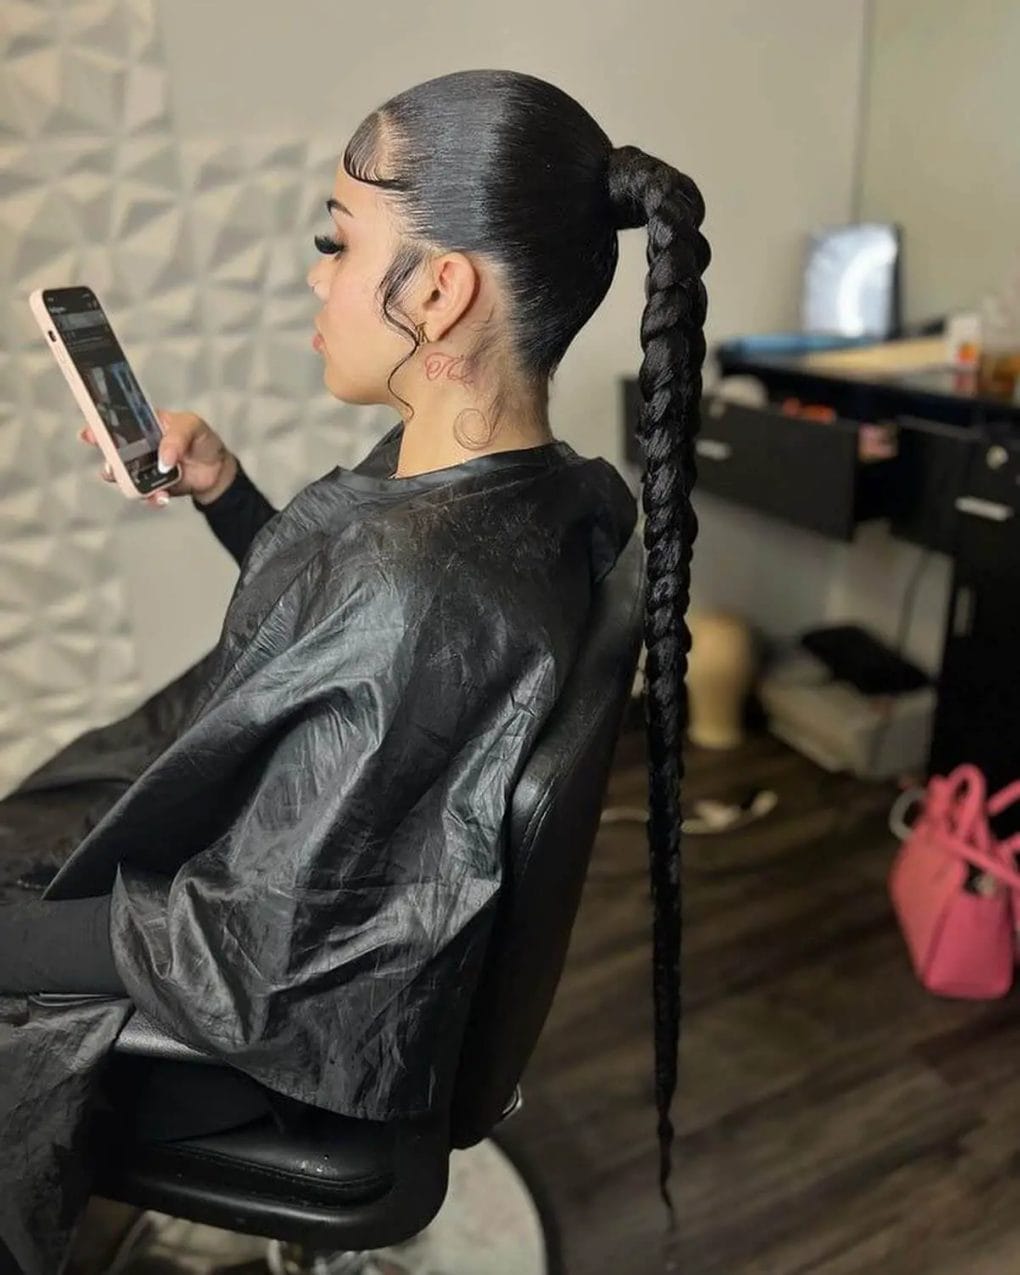 Sleek, polished, long black braid forming a ponytail down to the lower back.